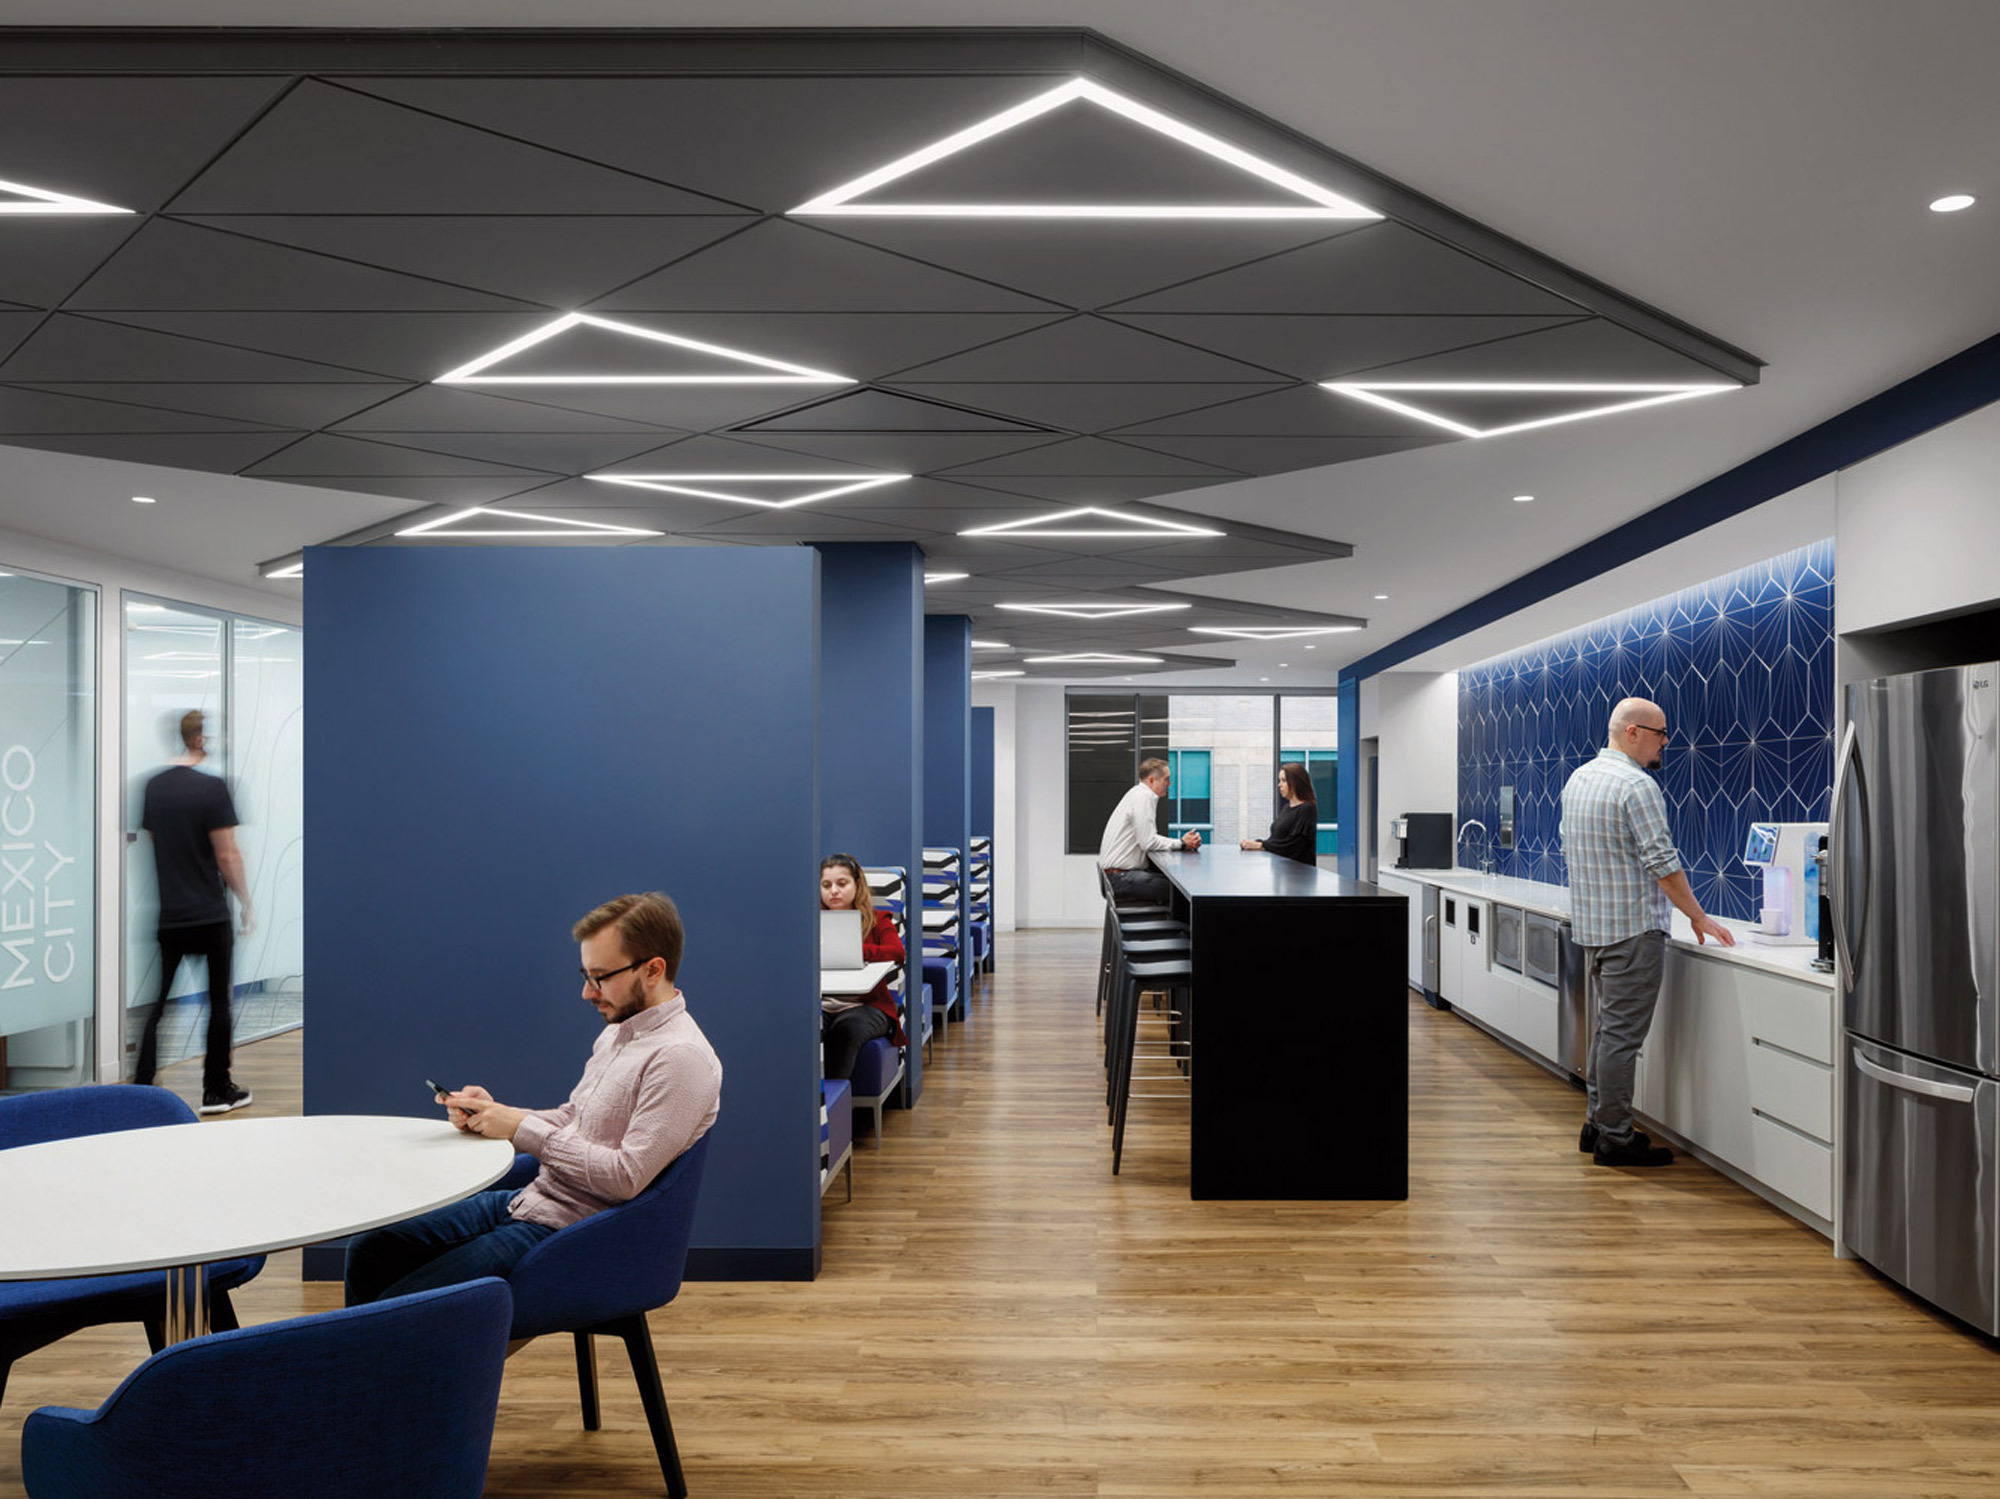 Modern office kitchen and break area featuring bold blue partitions, geometric ceiling lights, and wood flooring. White countertops and stainless steel appliances complement the space where employees are casually interacting.